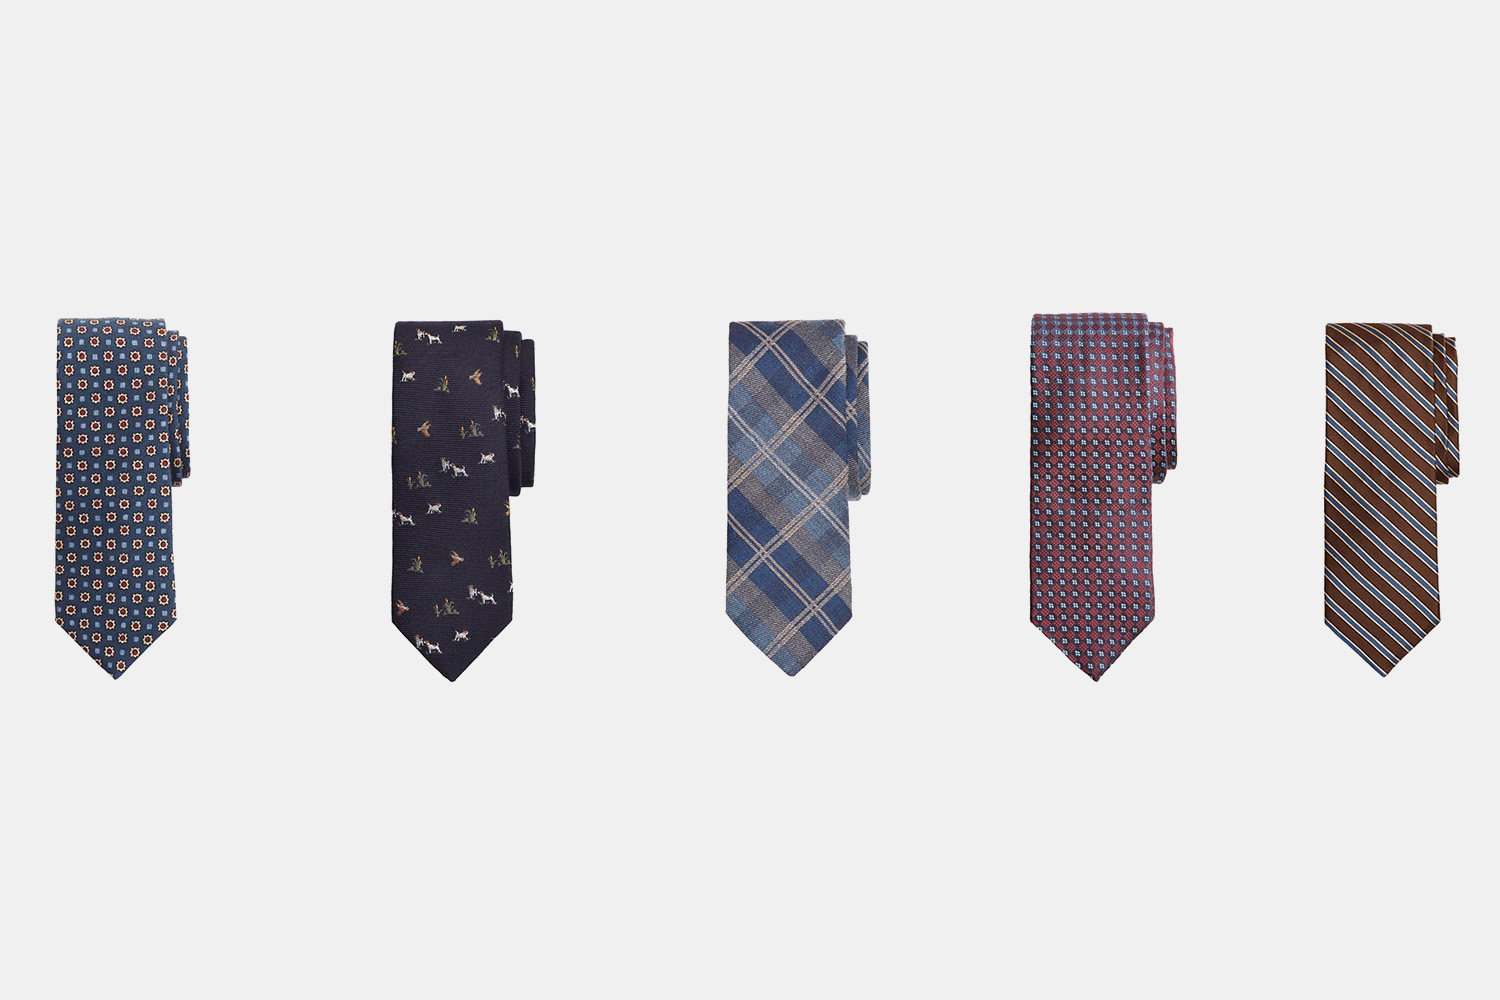 Deal: You Probably Need New Ties. These Are the Ones You Should Buy.